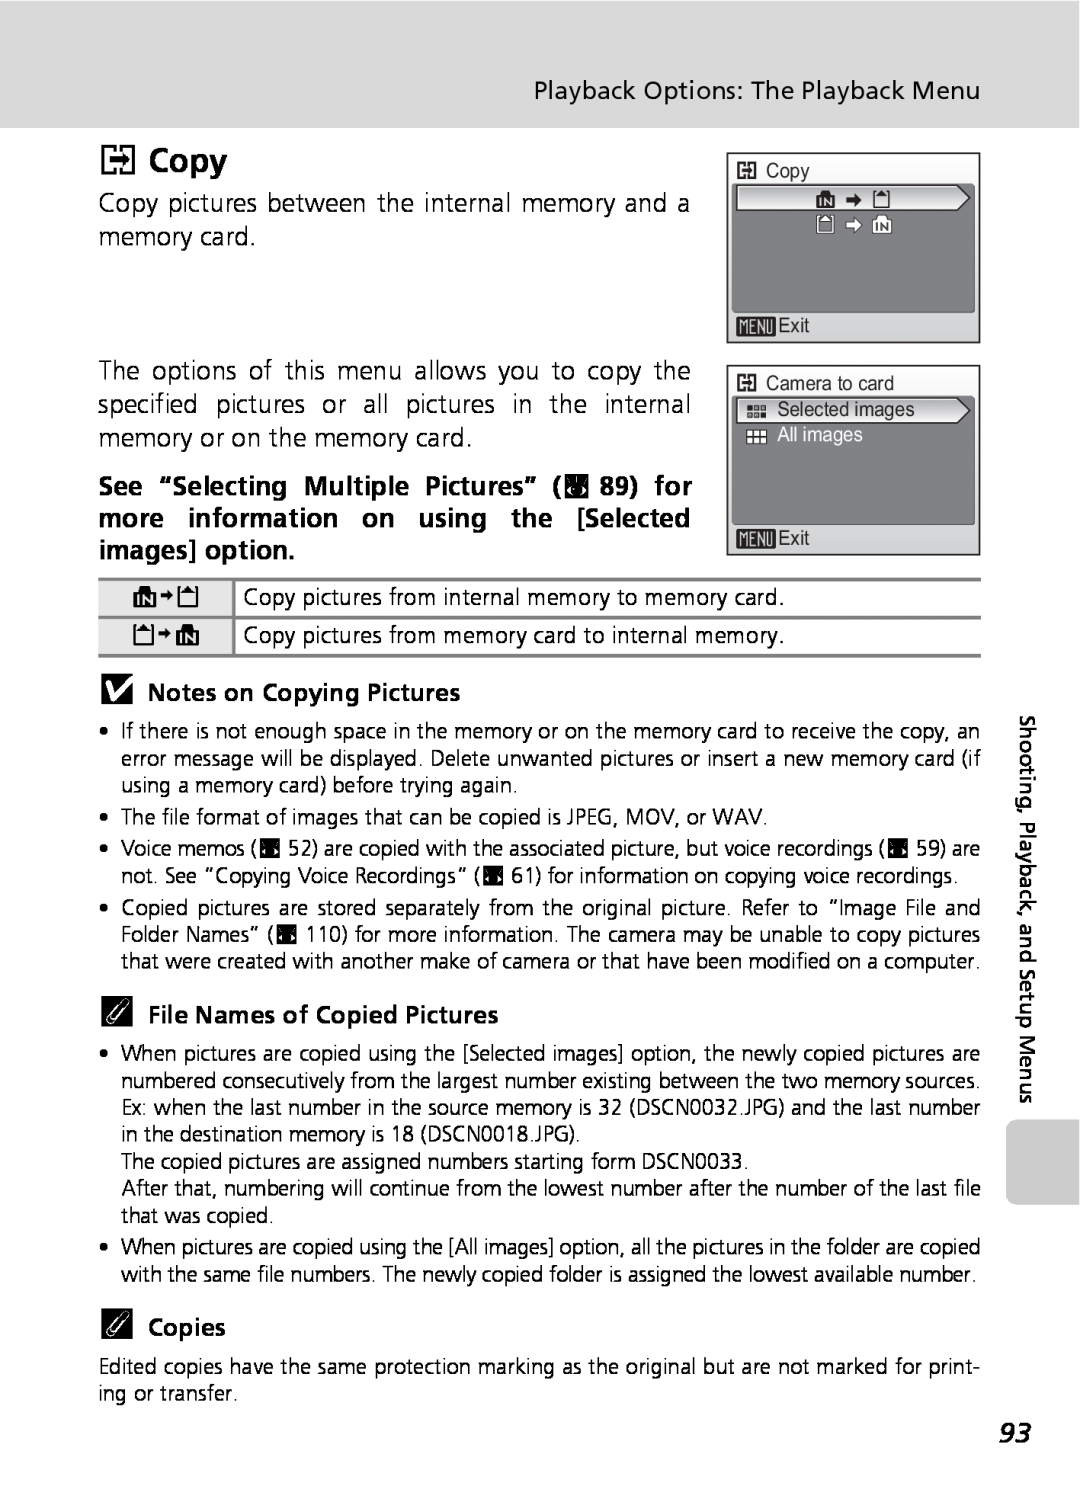 Nikon COOLPIXS9 manual LCopy, jNotes on Copying Pictures, kFile Names of Copied Pictures, kCopies 